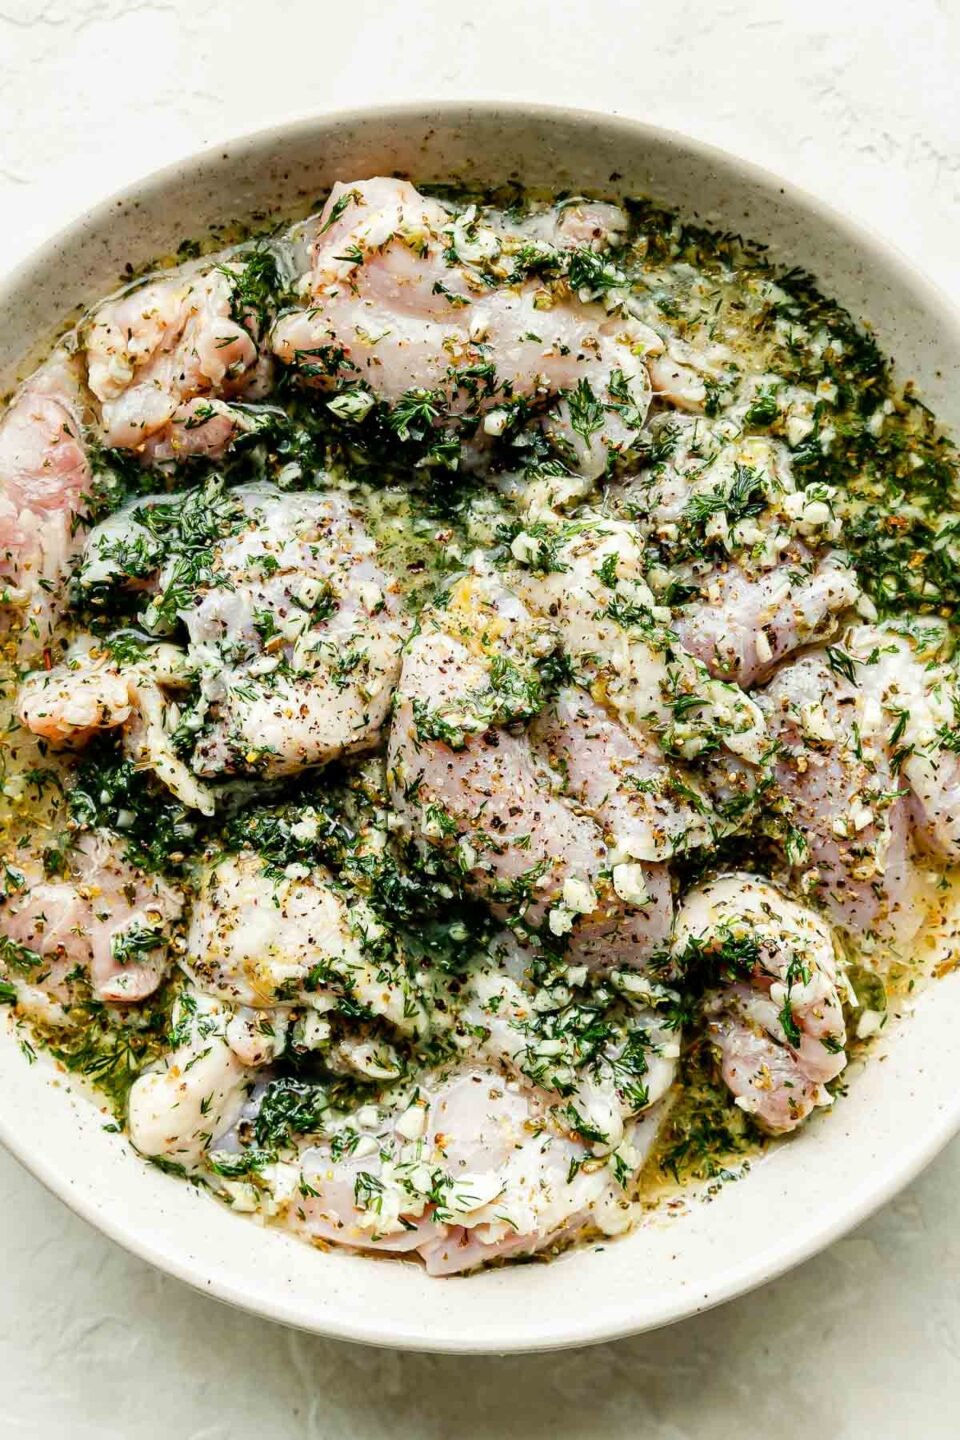 Chicken thighs marinate in a lemon herb marinate in a large white bowl resting on a white textured surface.